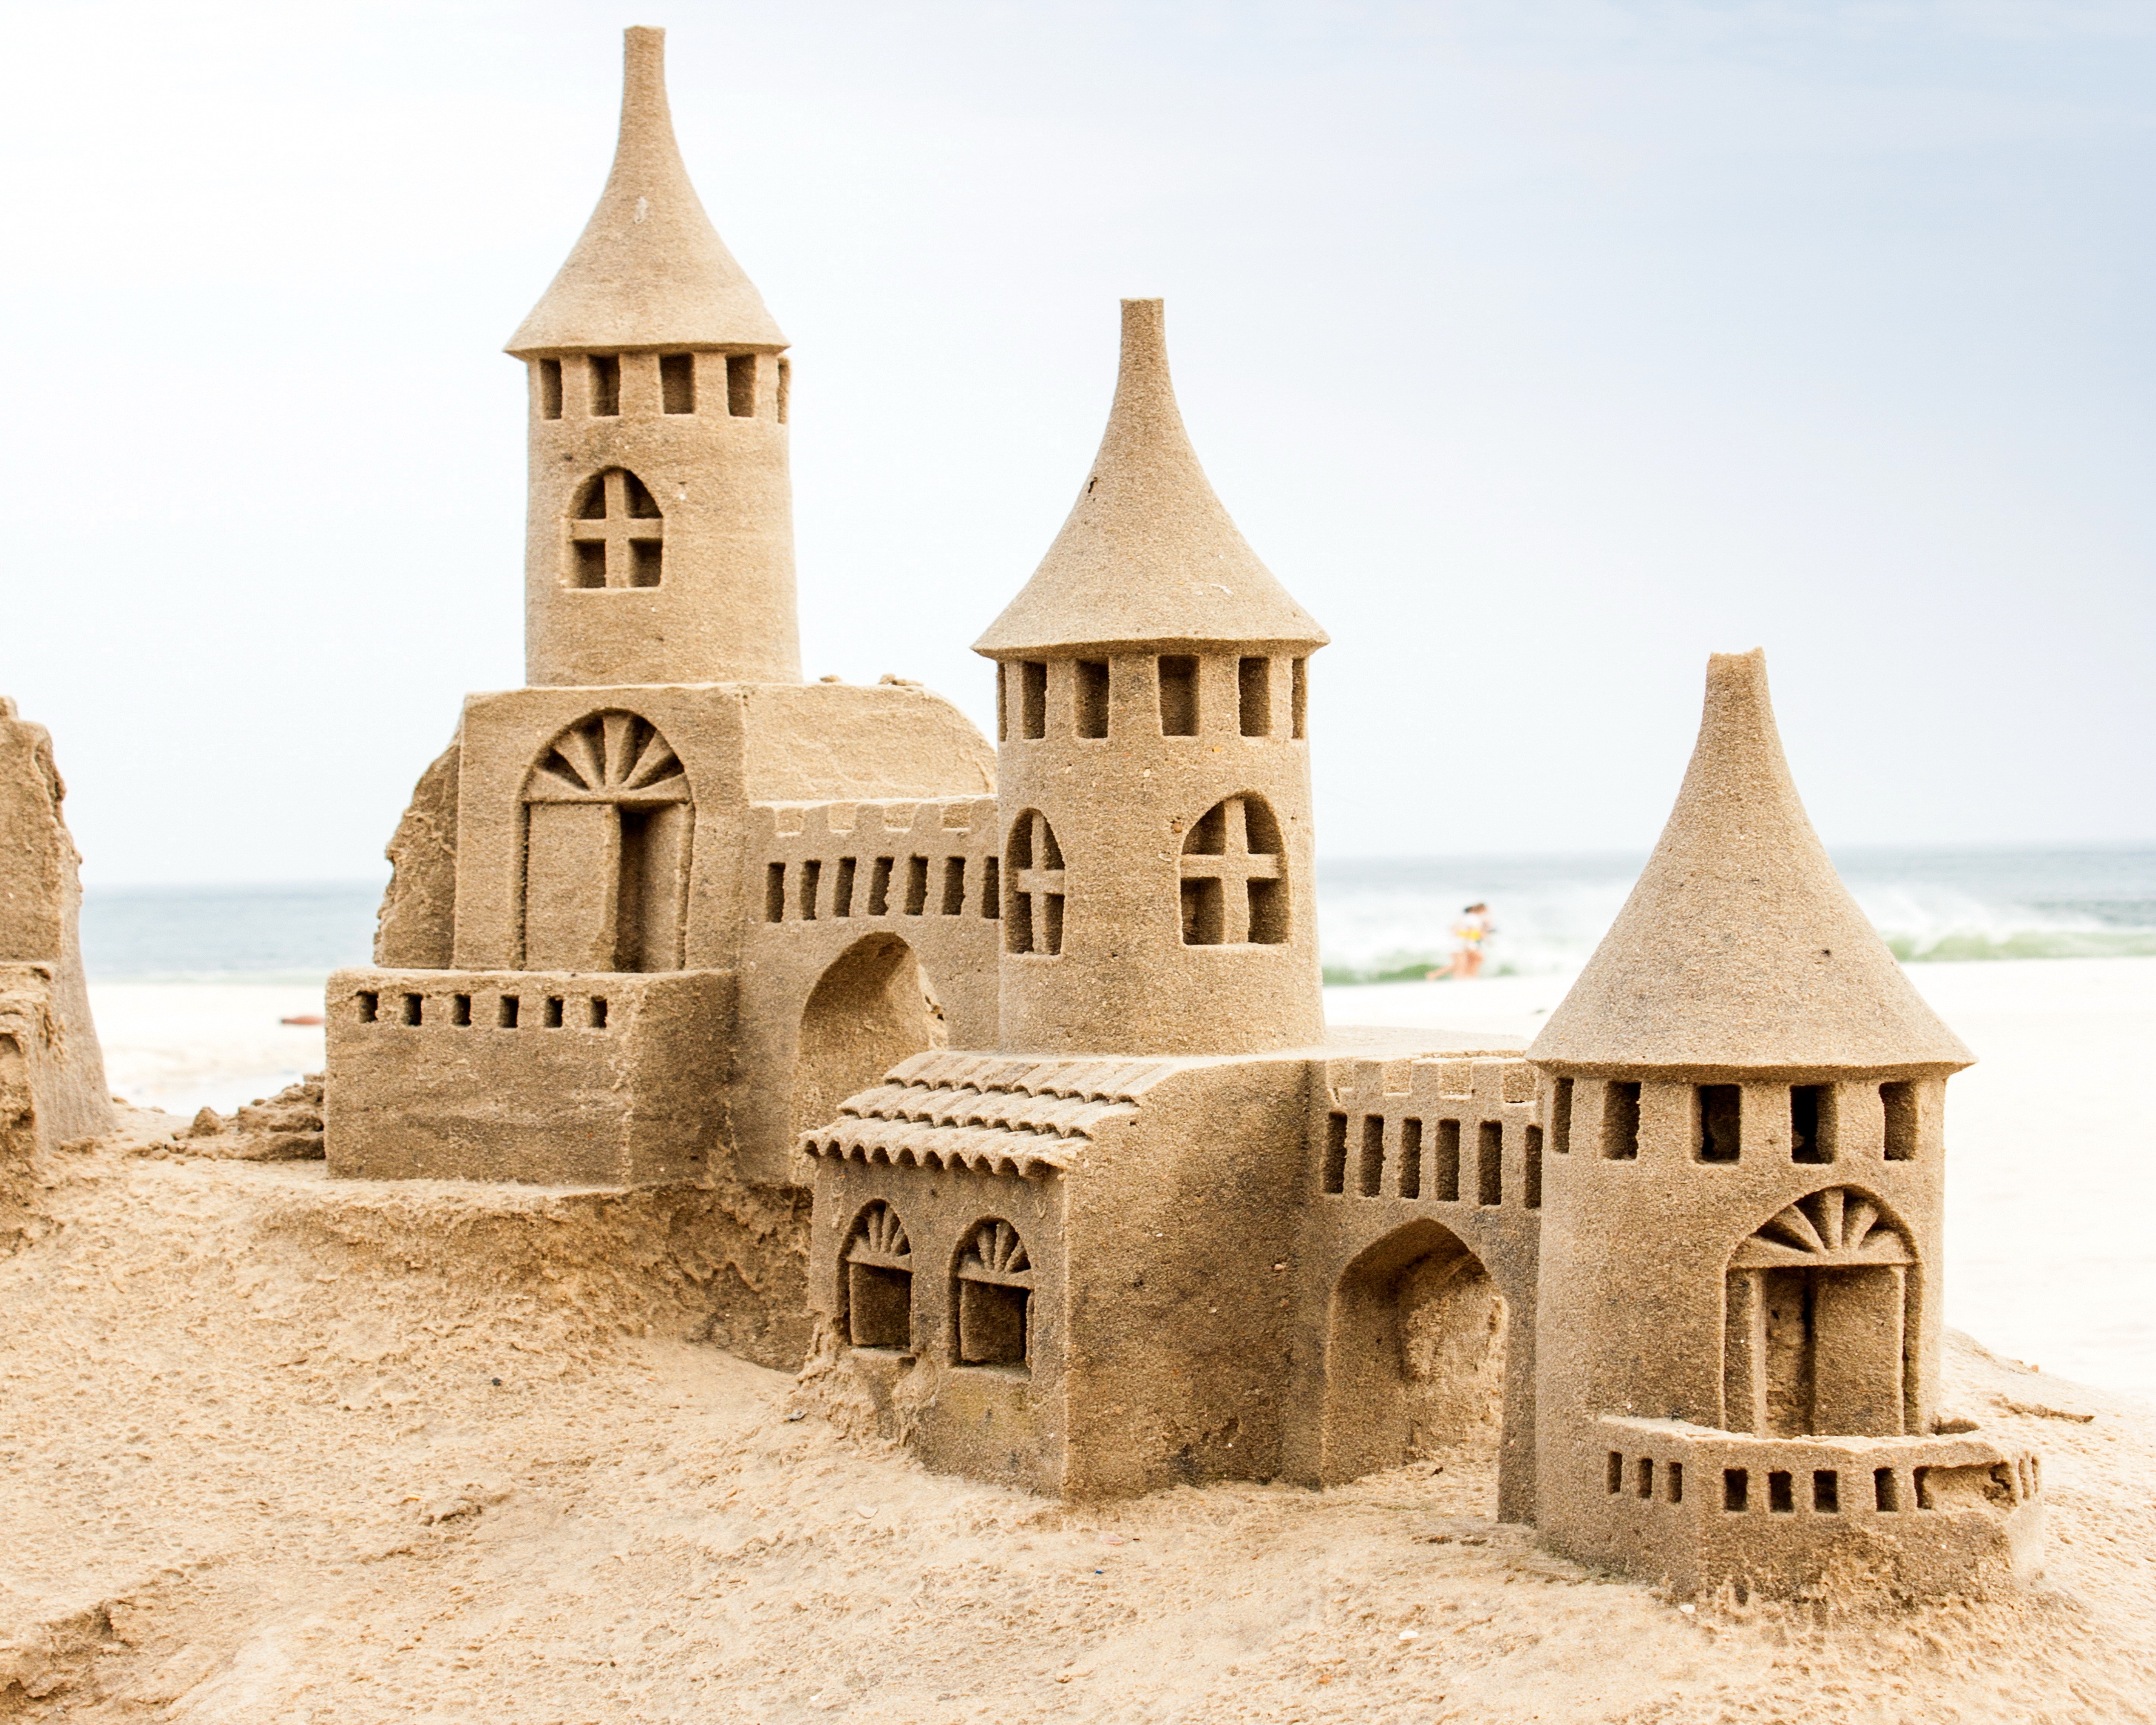 Beaches: Sand Tower Beach Castle Wallpaper For Note 3 for HD 16:9 ...